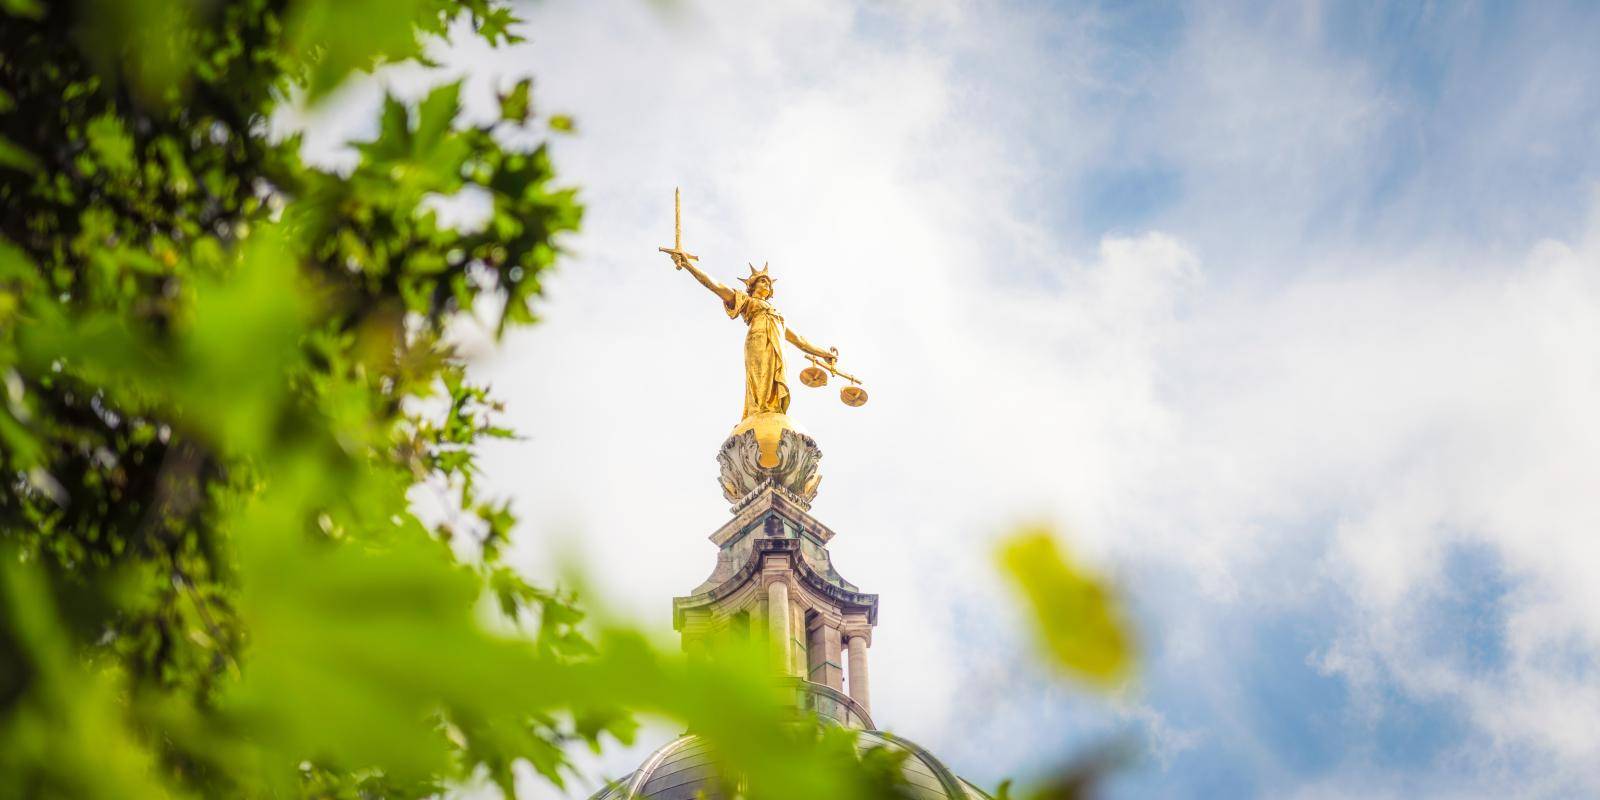 The gold coloured statue of Lady Justice, holding a sword and scales, on top of the dome of the Old Bailey criminal court in the City of London.